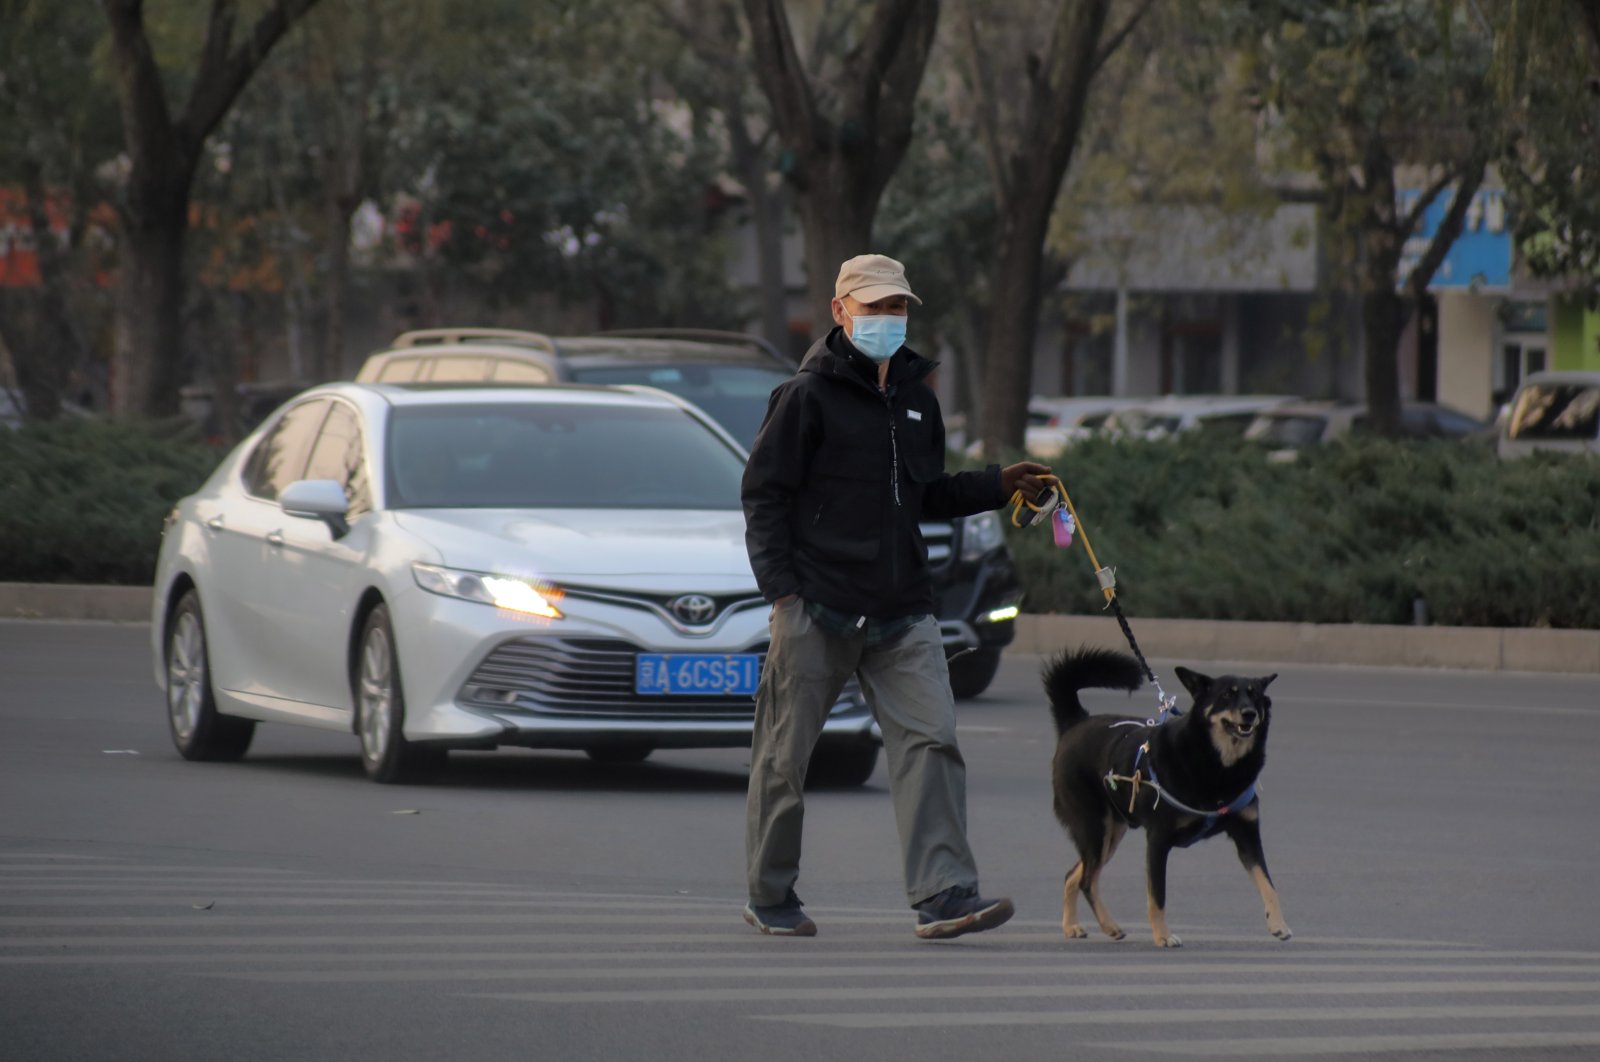 A man wearing protective face mask walks with a pet dog in the street during the coronavirus pandemic in Beijing, China, Nov. 16, 2021. (EPA Photo) 